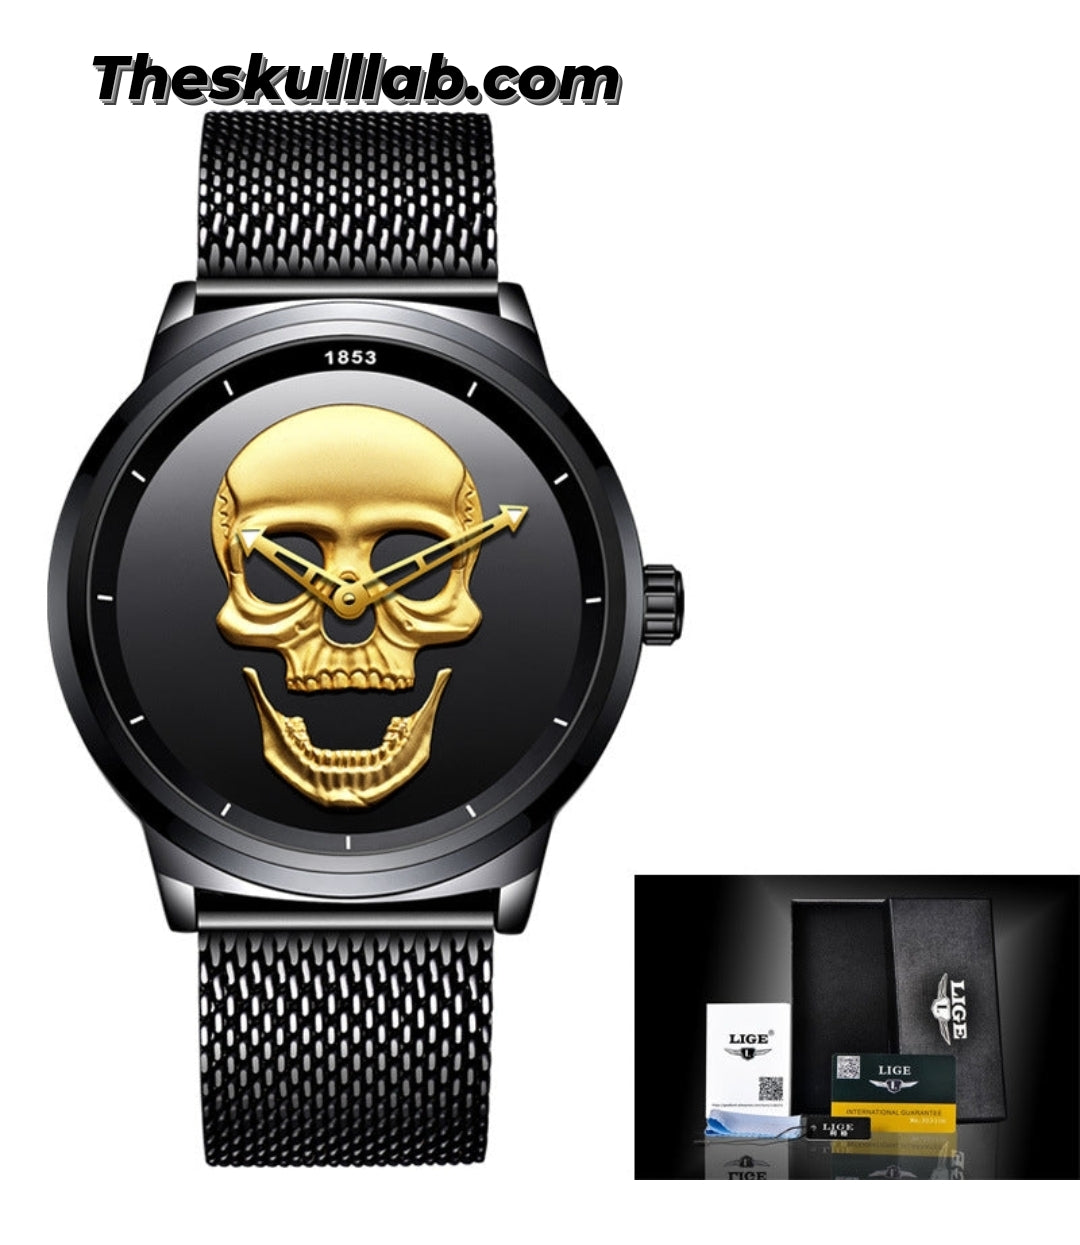 Simple LIGE Skull Watch 3 Face Styles 2 Wristband Styles